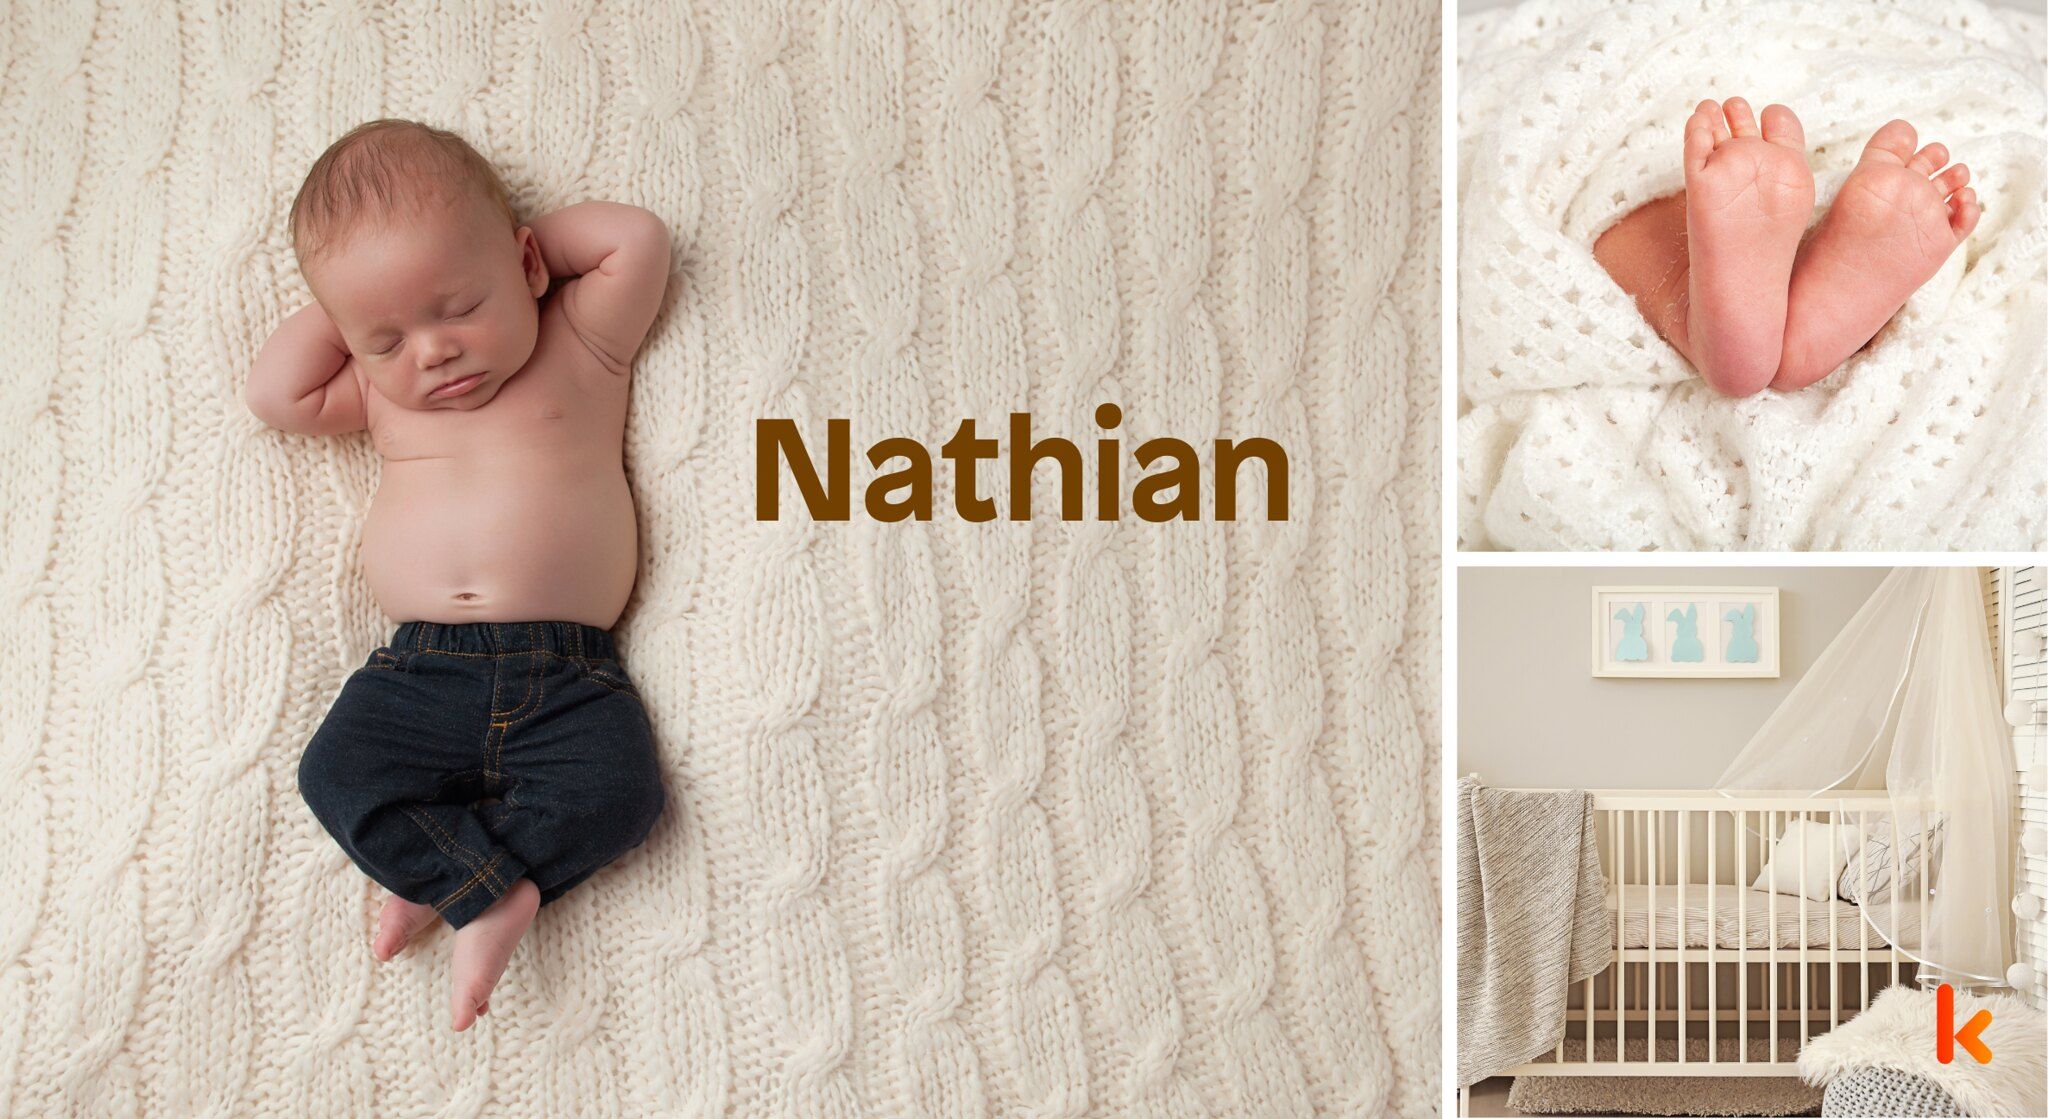 Meaning of the name Nathian